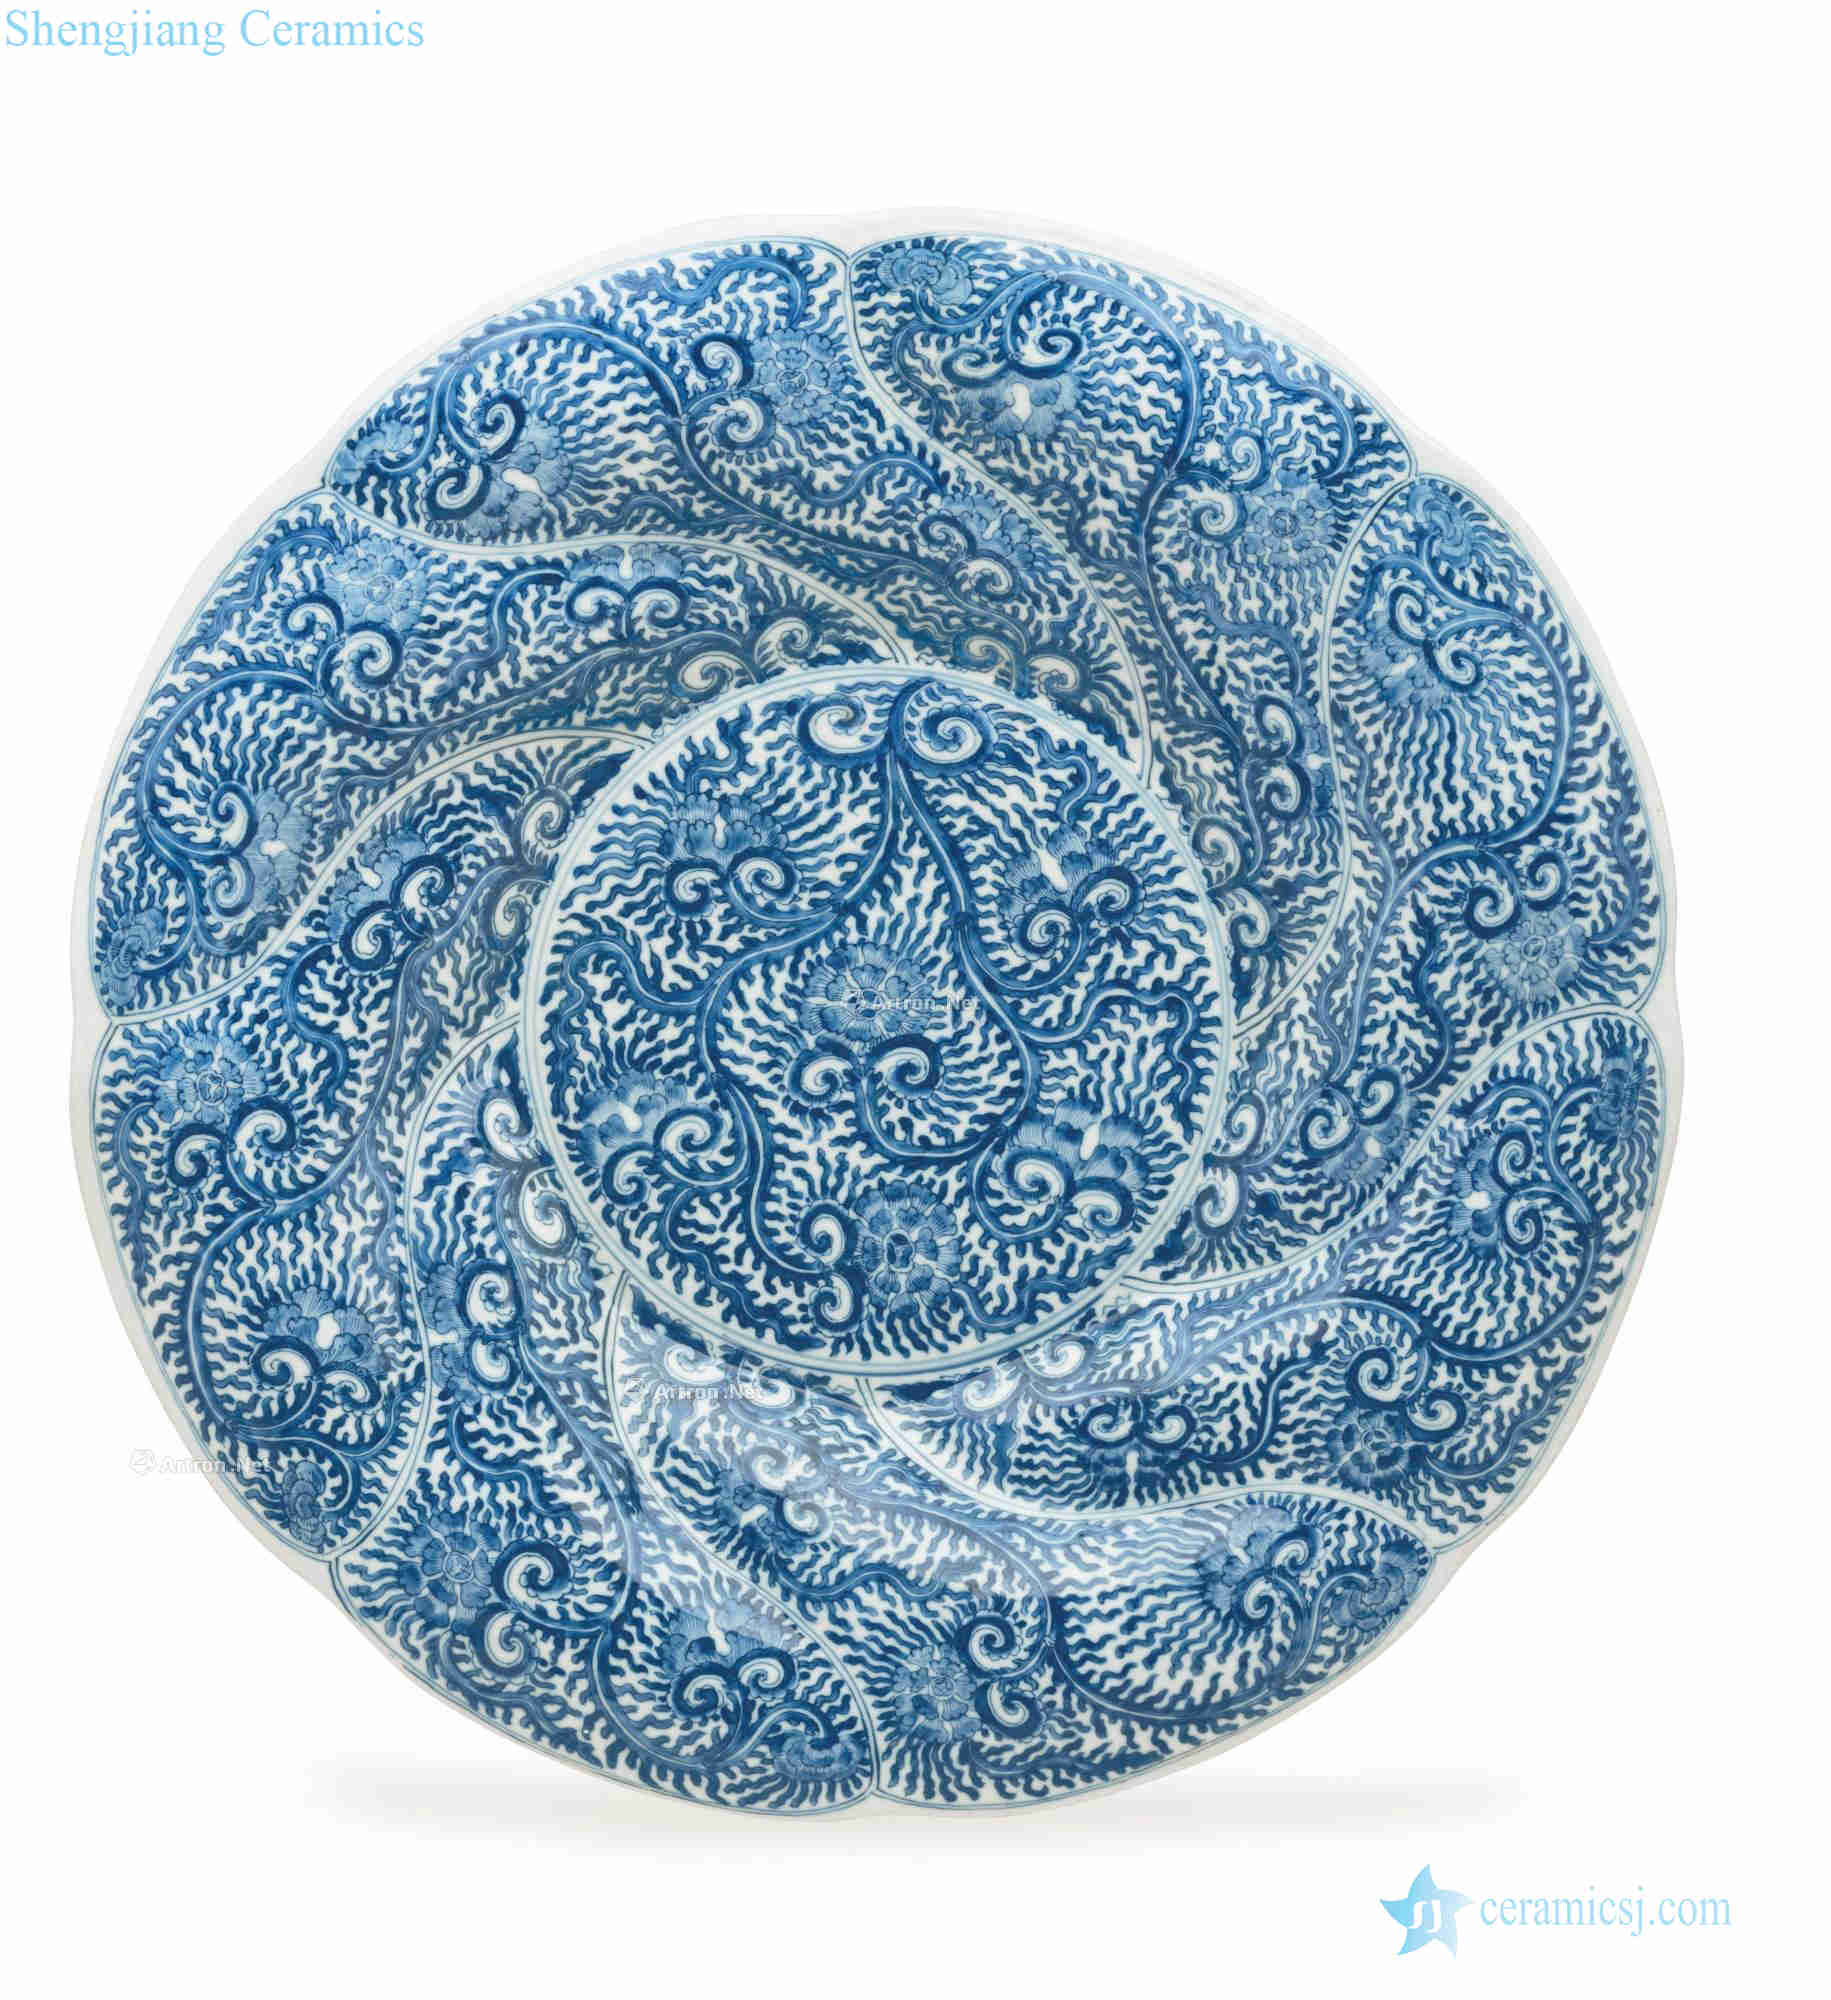 Kangxi period, 1662-1722, A LARGE PAIR OF BLUE AND WHITE SPIRAL - MOLDED DISHES